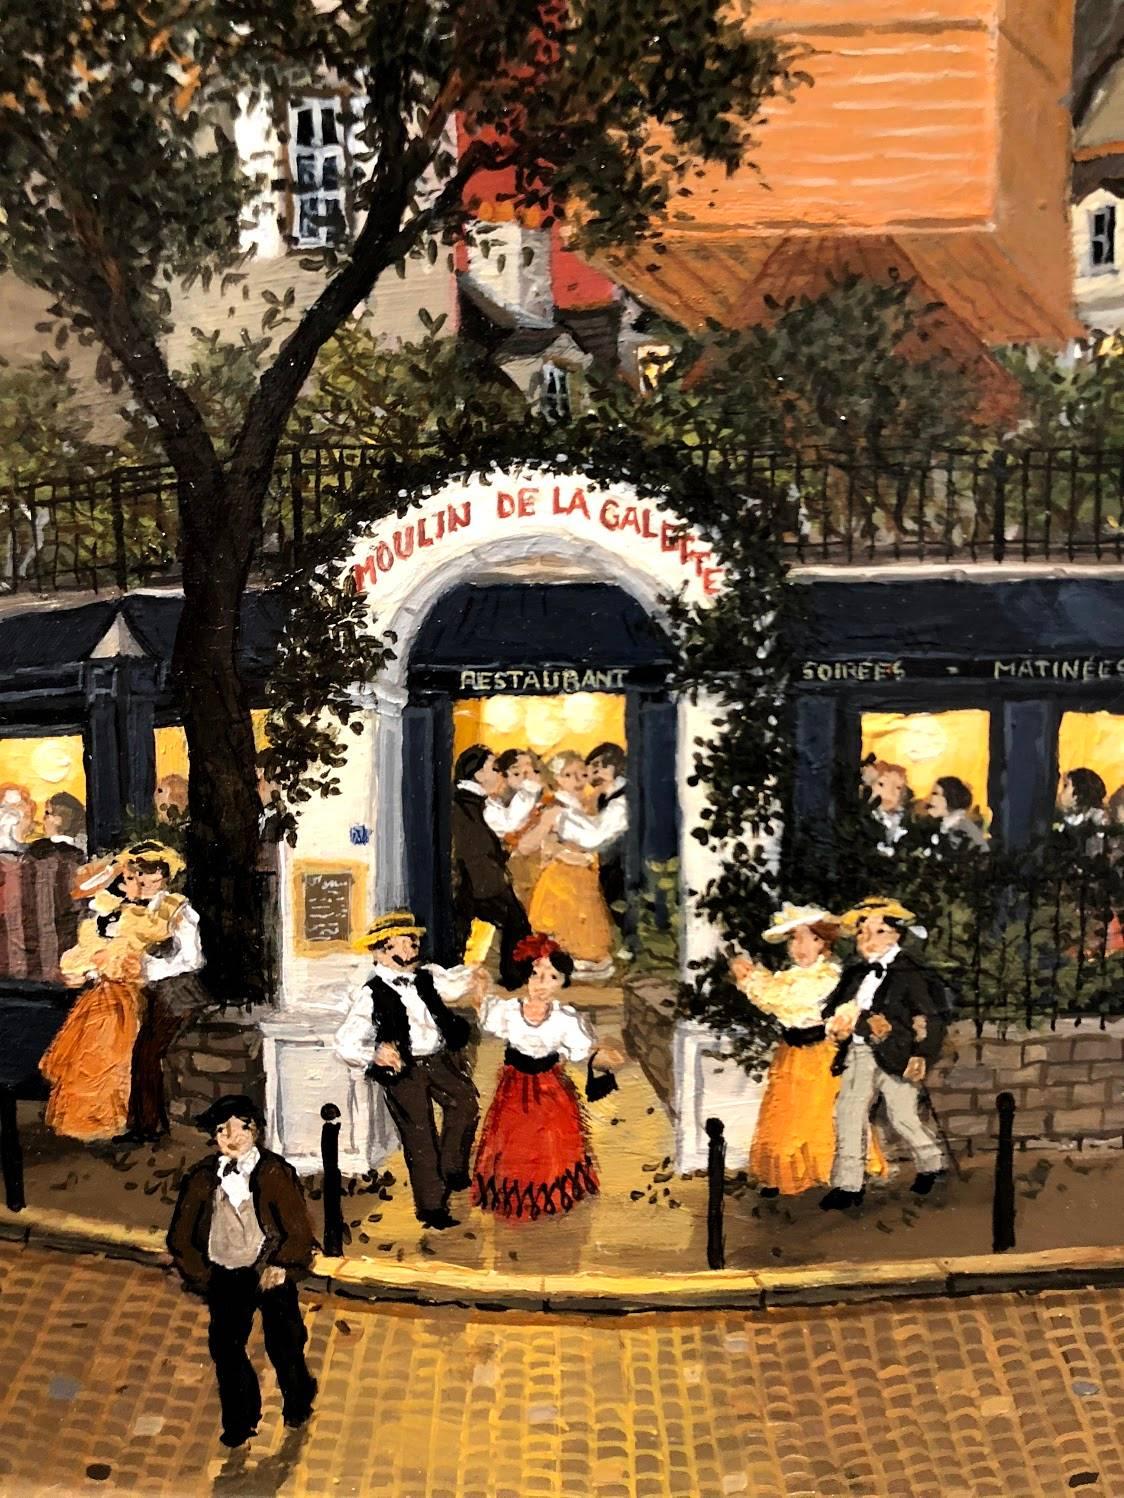 This acrylic painting on board illustrates the busy and dynamic Parisian night life at a Moulin restaurant, with warm and inviting interiors and people dancing on the sidewalk.

Fabienne Delacroix is the youngest child of the master naïf painter